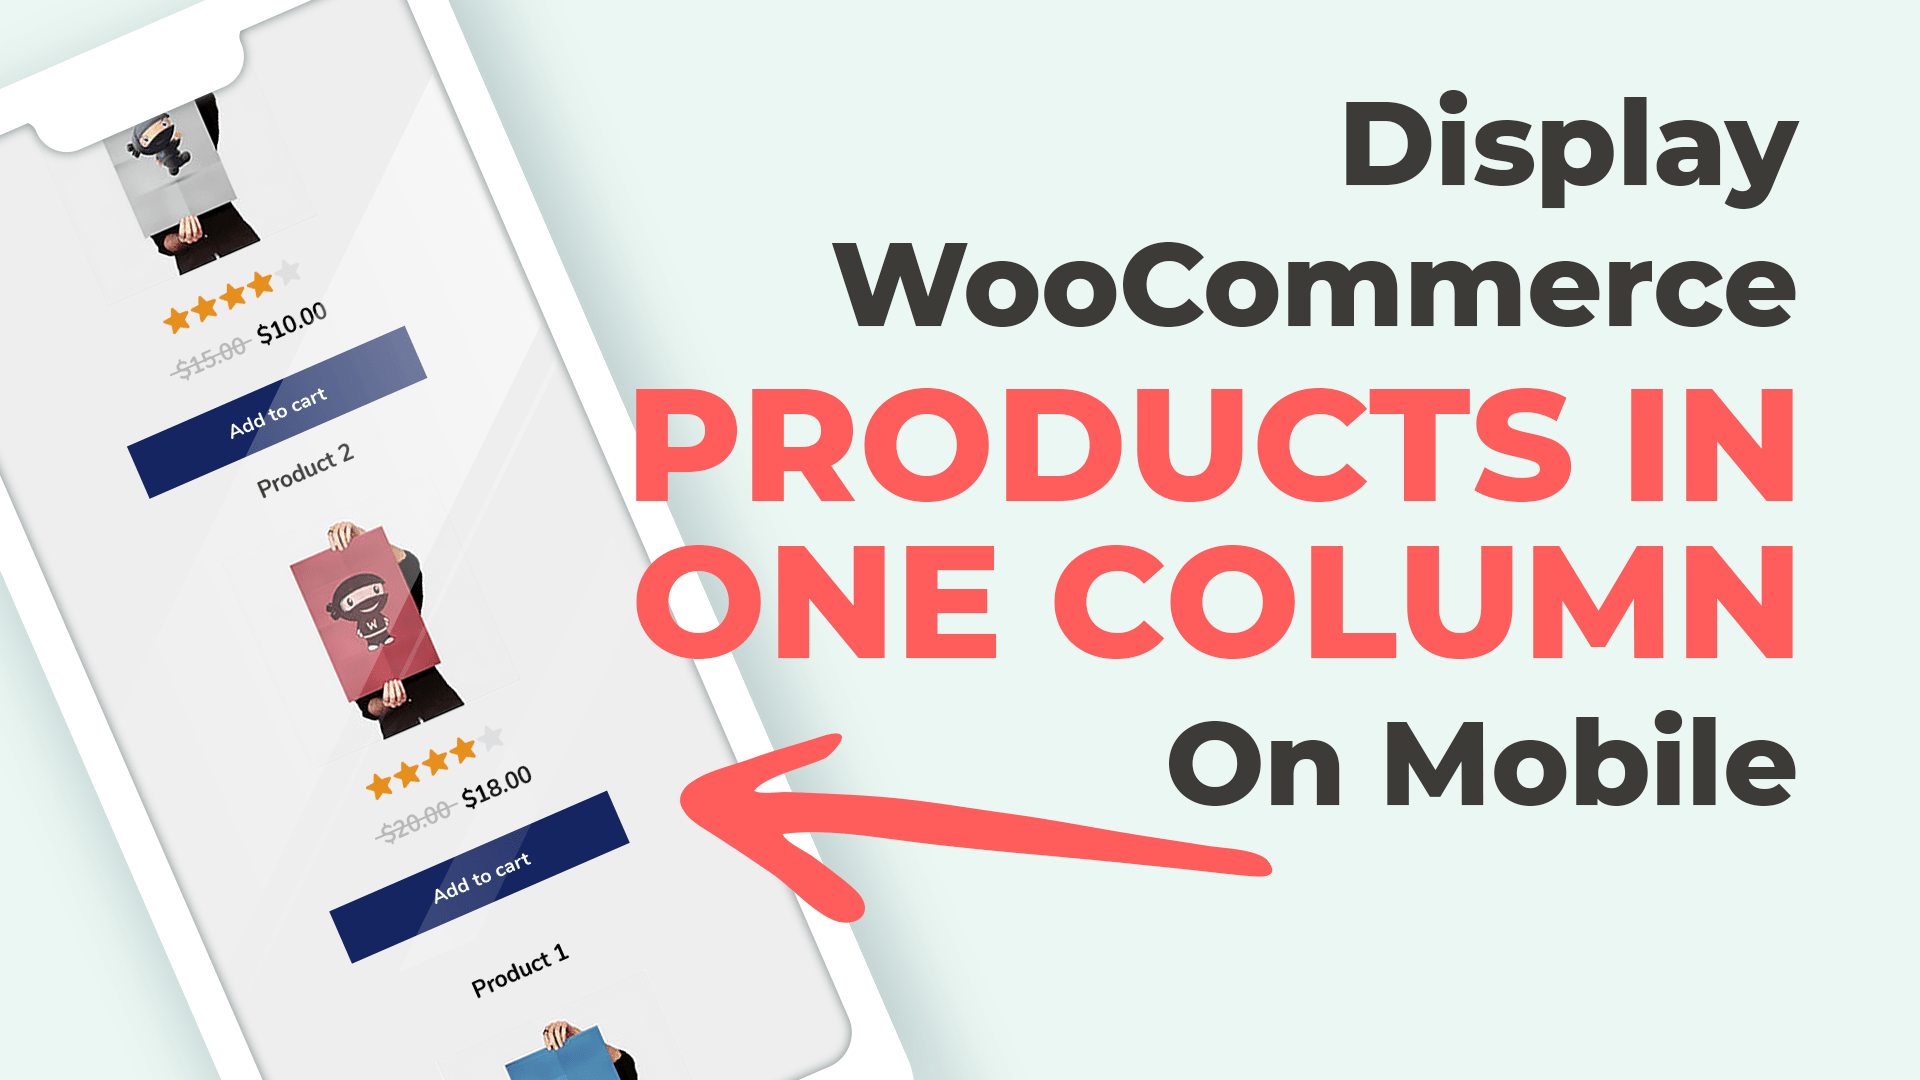 Display WooCommerce Products in Single Column on Mobile Devices